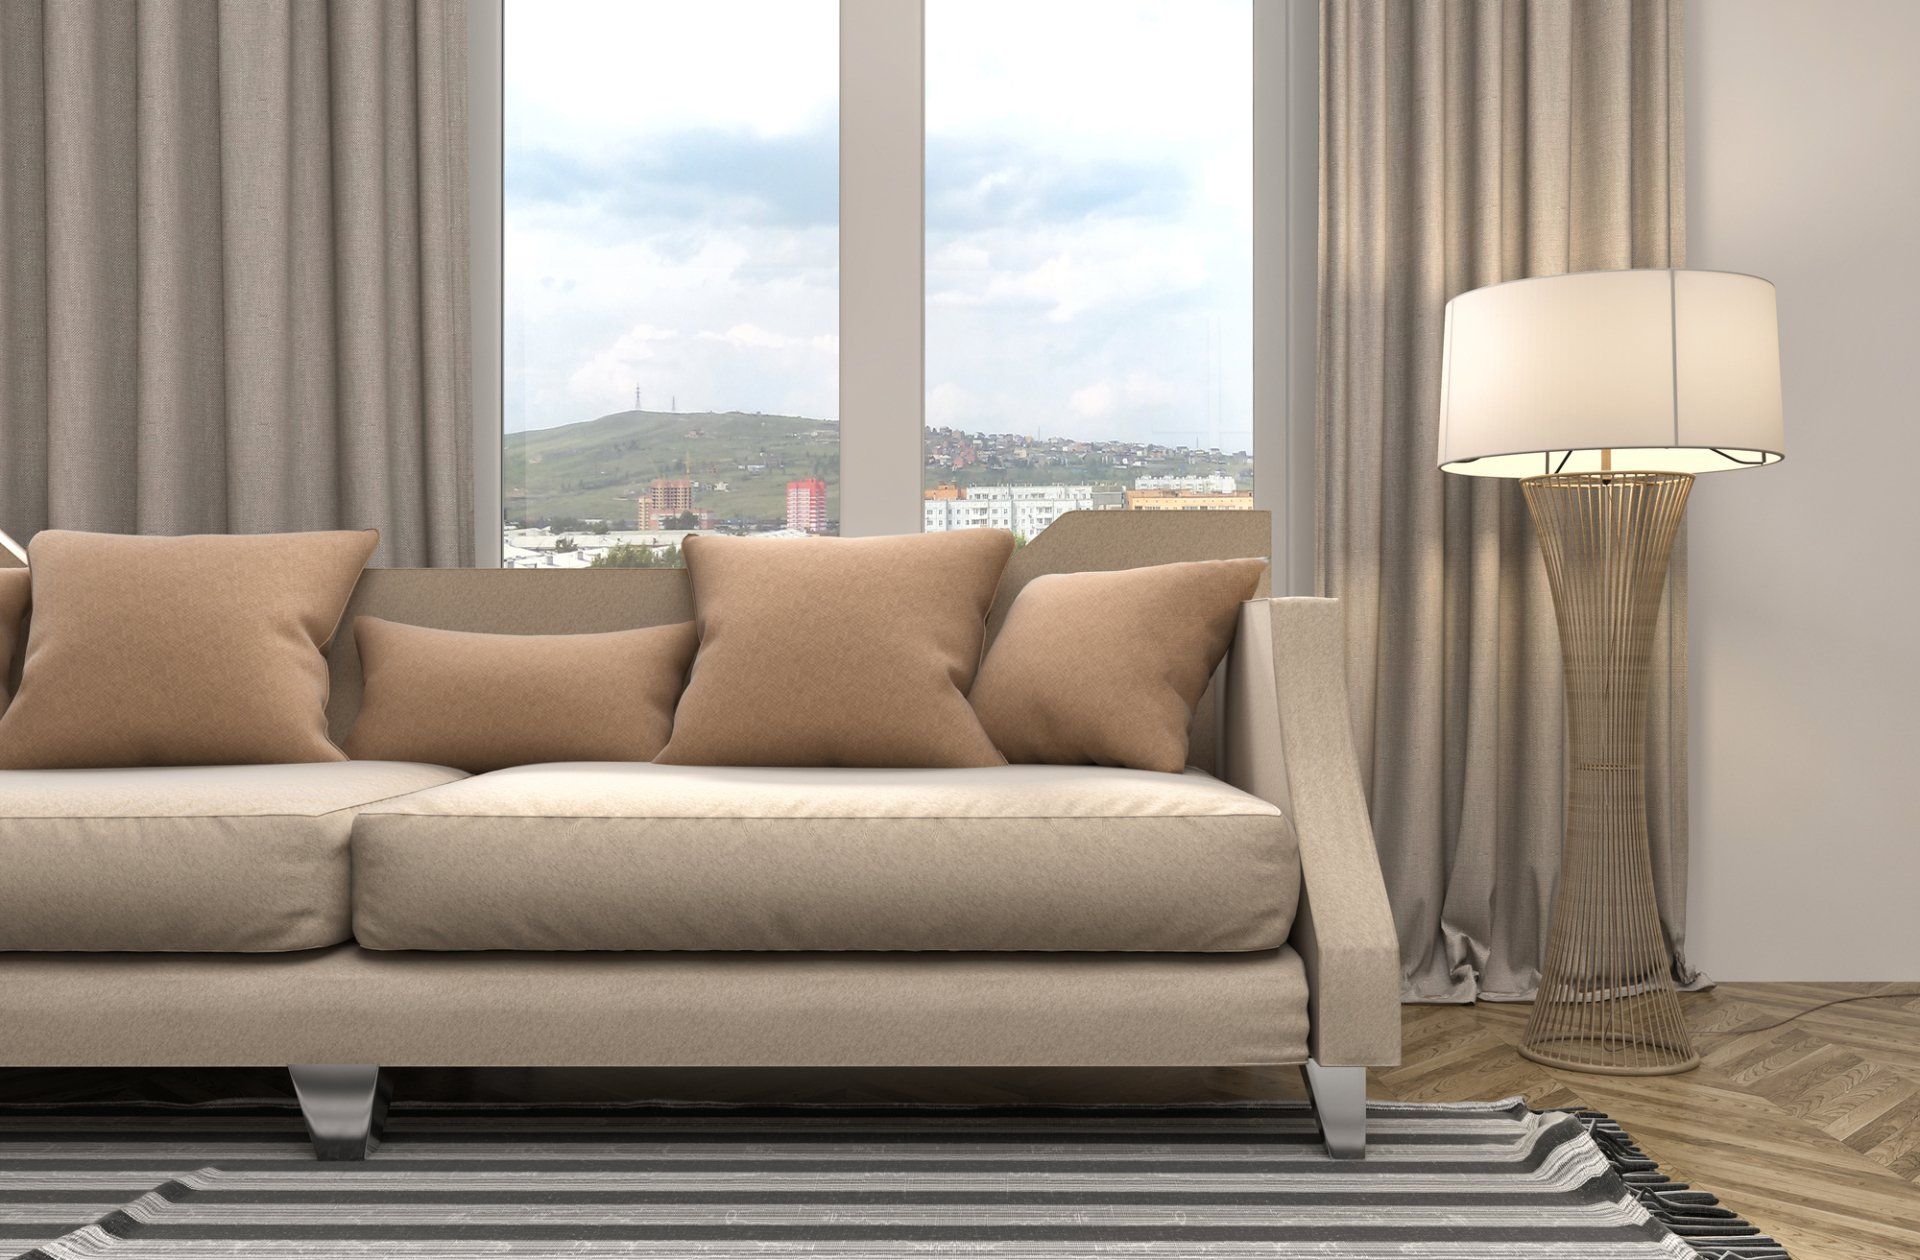 Neutral toned living room with drapes open behind comfy fabric couch with cushions, striped rug and freestanding lamp.